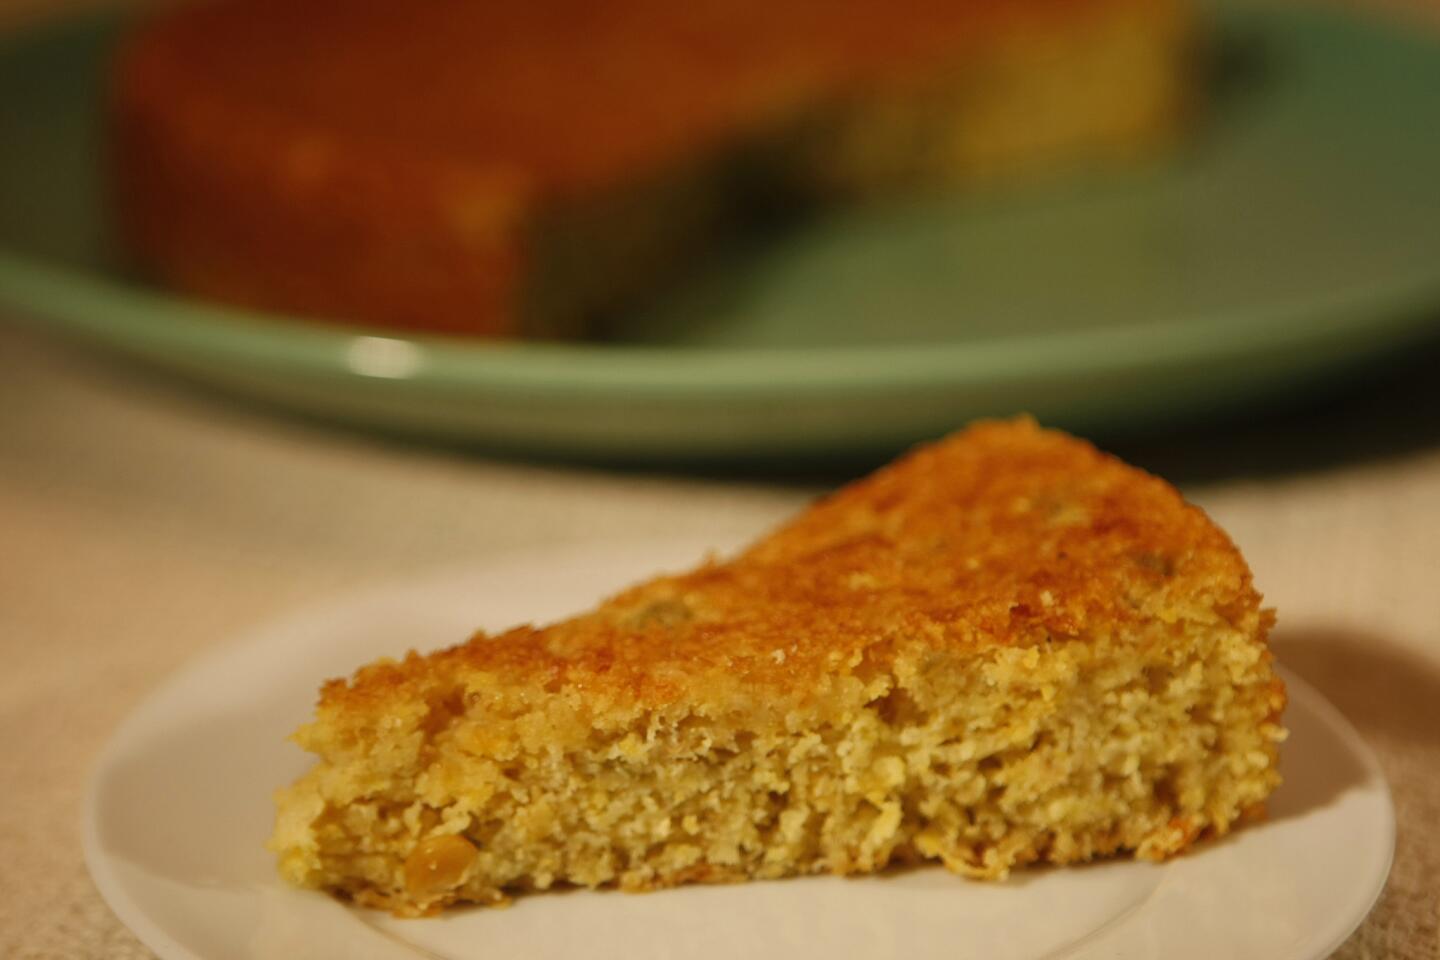 This cornbread is made with cheese and chopped chiles, and then finished off with a drizzle of honey.